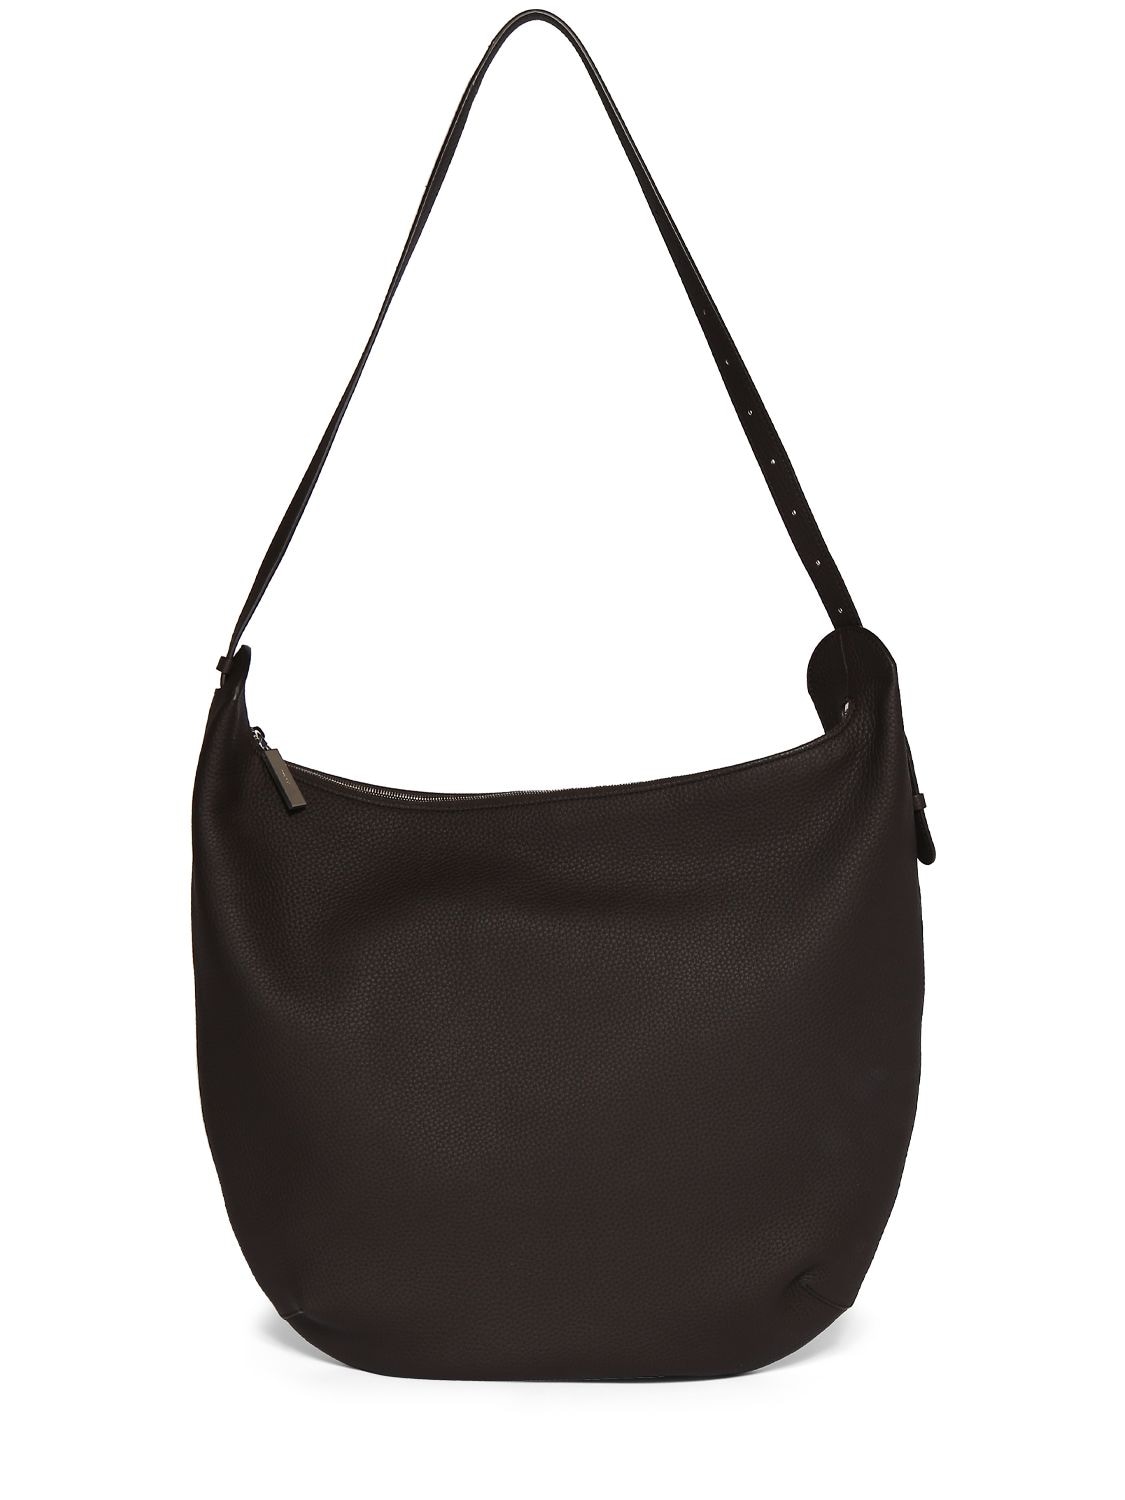 The Row Allie Leather Shoulder Bag In Wood Brown Pld